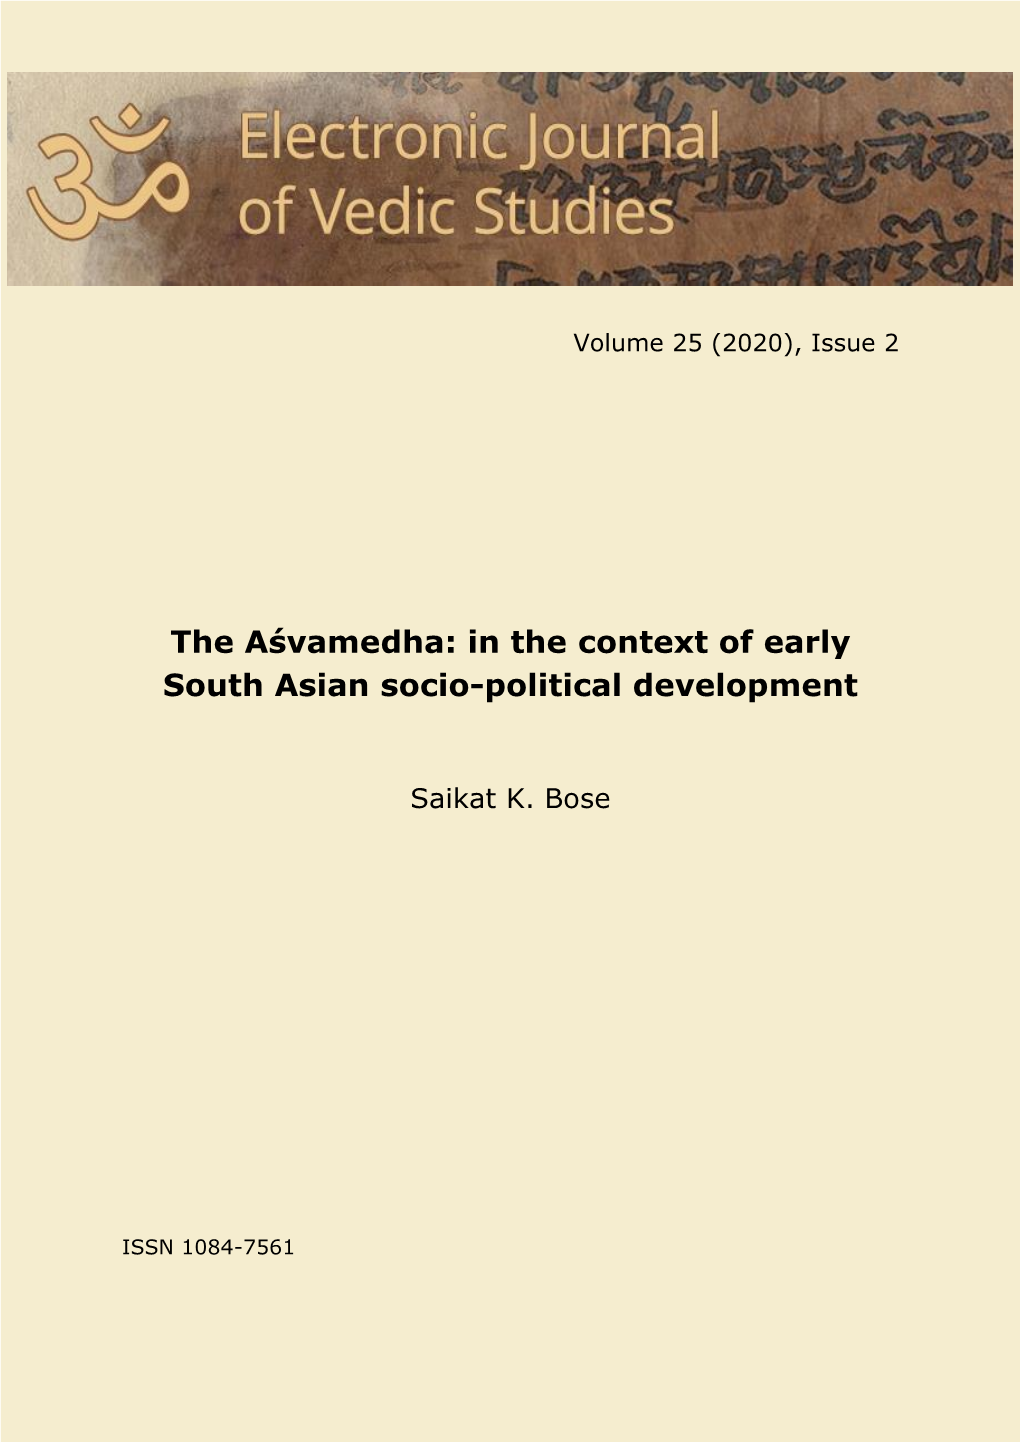 The Aśvamedha: in the Context of Early South Asian Socio-Political Development